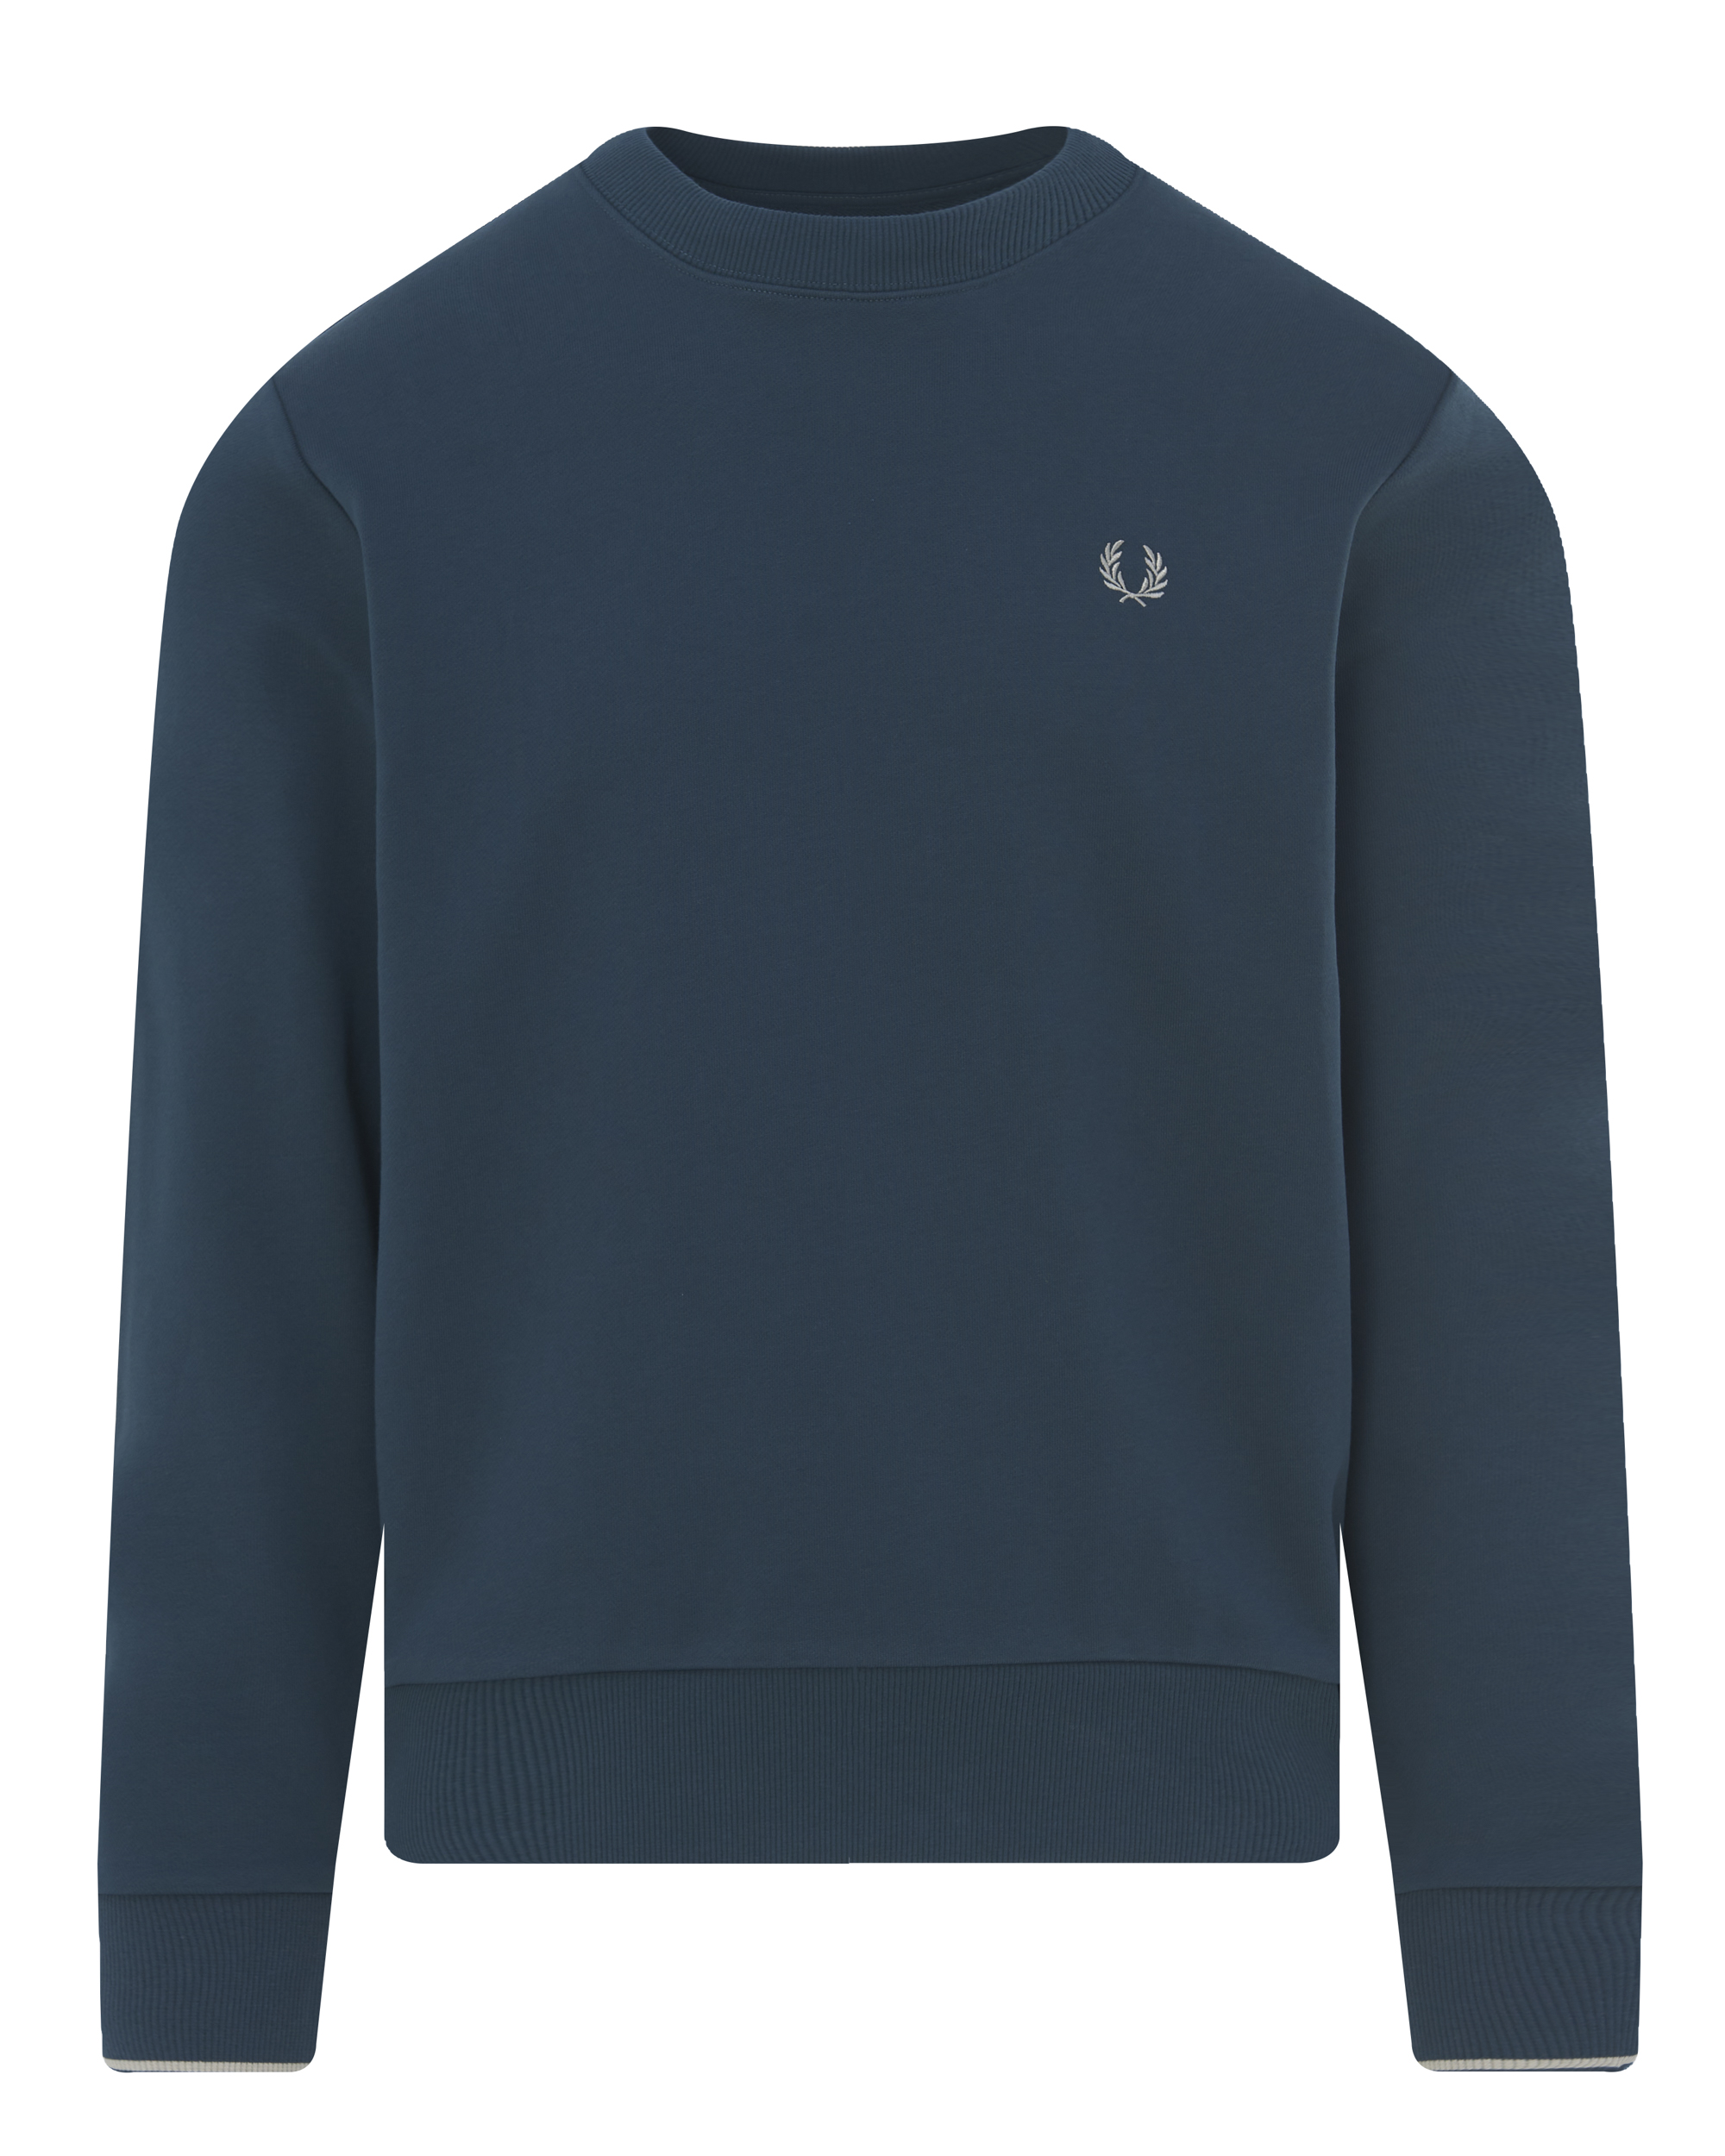 Fred Perry Heren Sweater